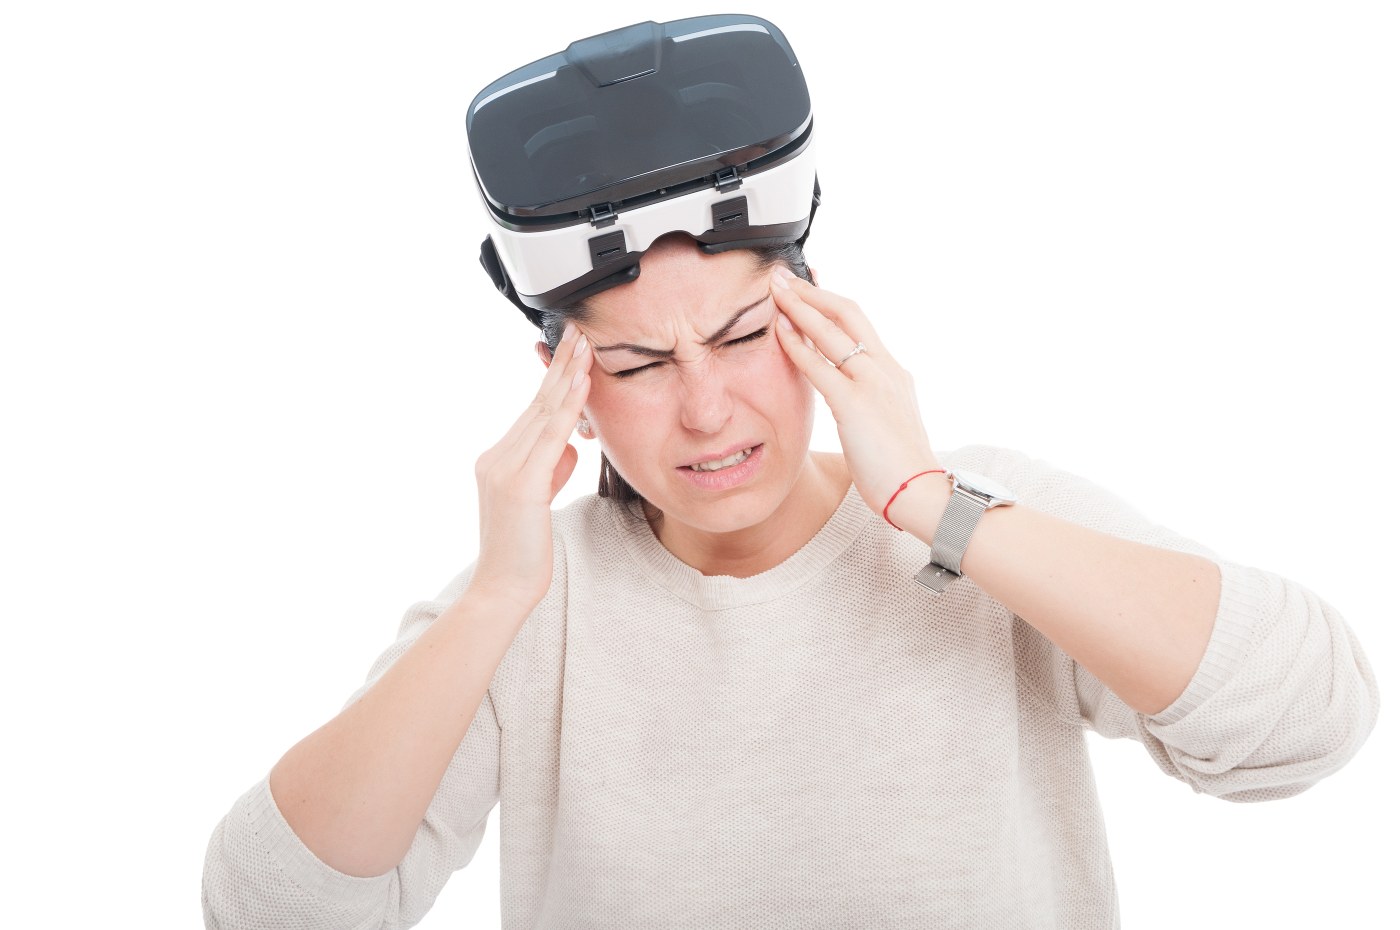 Why does VR make my eyes tired?